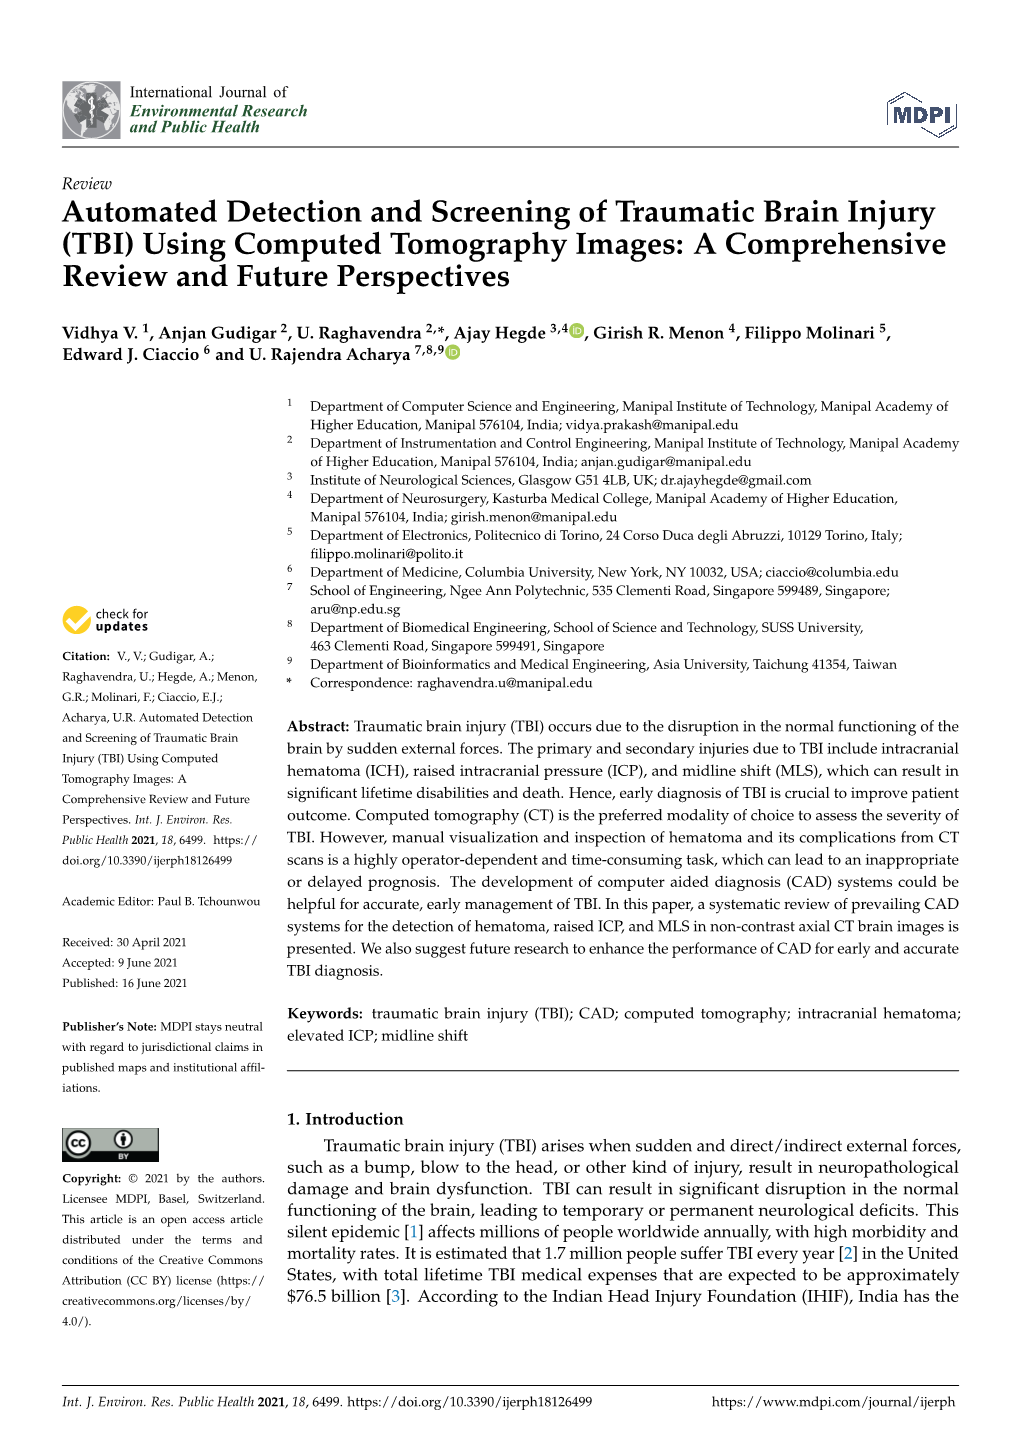 Automated Detection and Screening of Traumatic Brain Injury (TBI) Using Computed Tomography Images: a Comprehensive Review and Future Perspectives